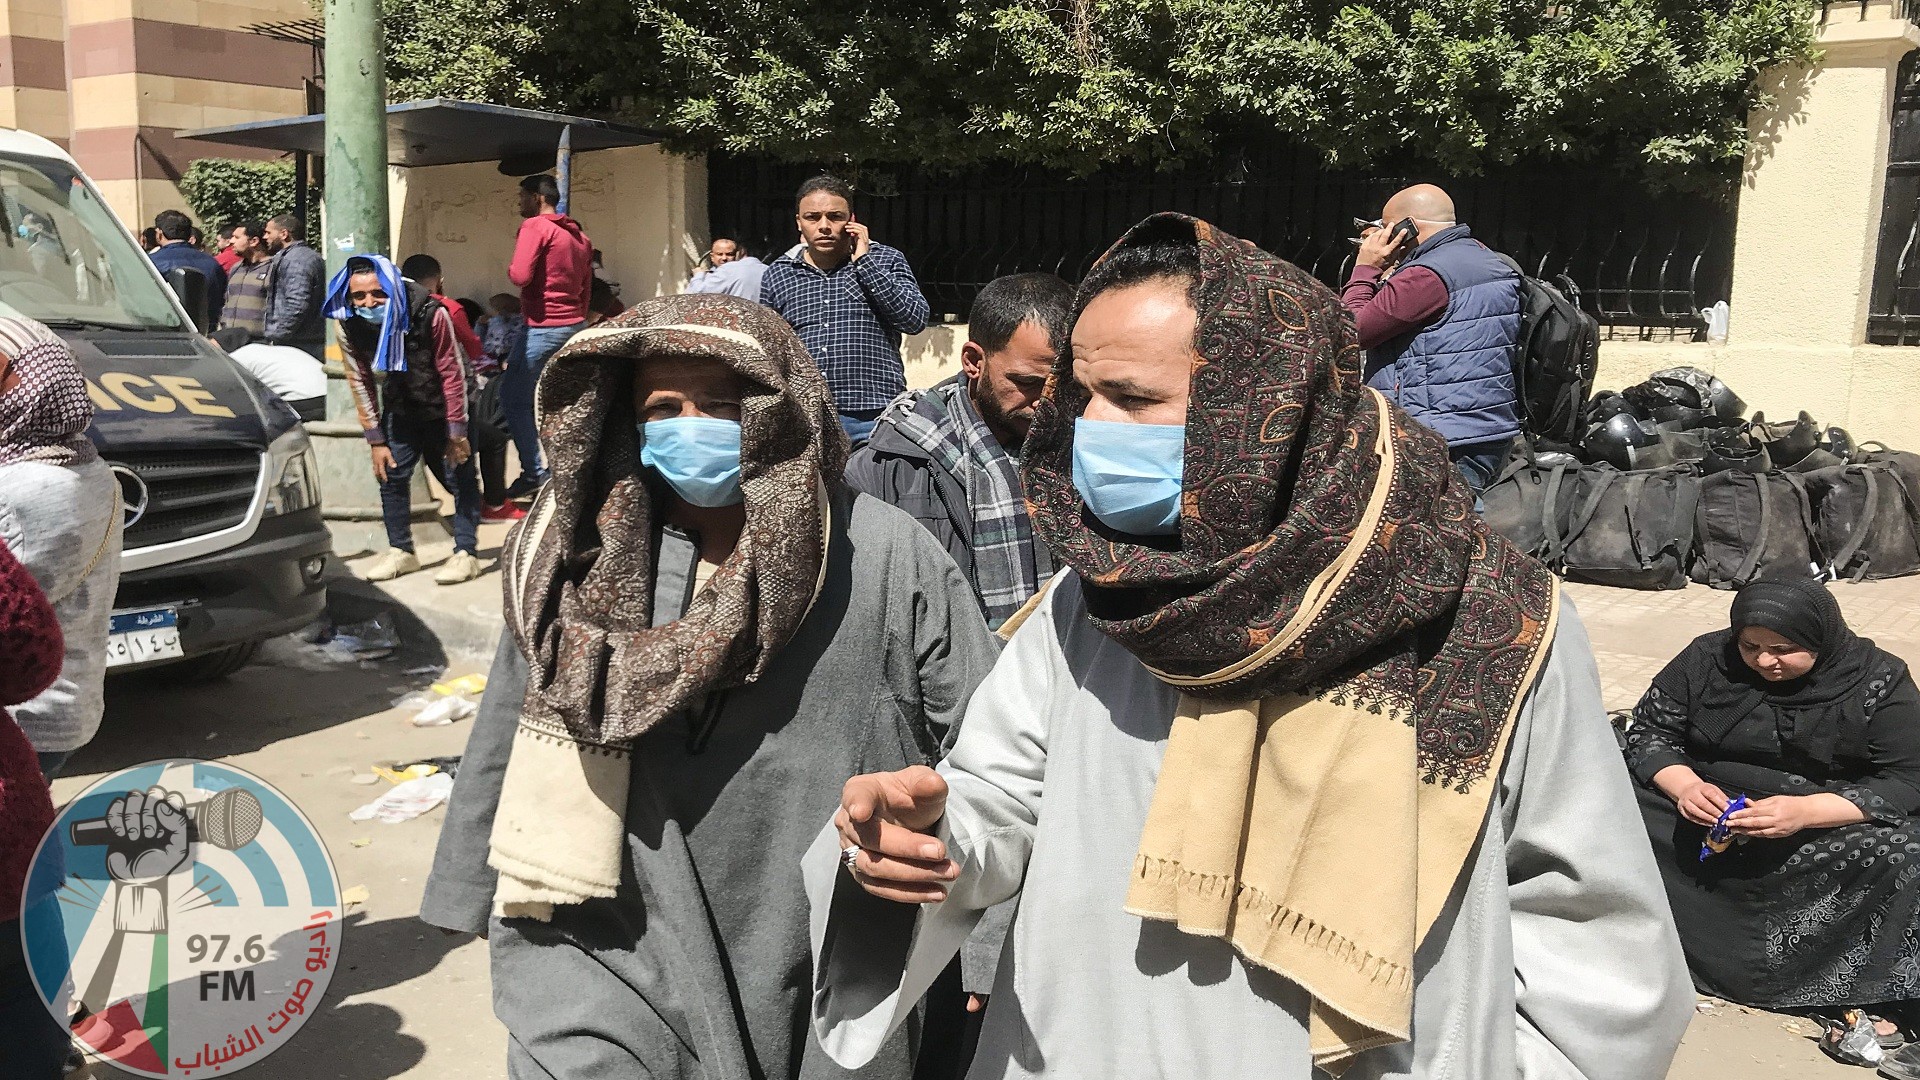 People wearing a protective mask in Cairo, Egypt, on March 8, 2020. Egyptians who wants to travel gathering front of egyptian health ministry to do corona-virus analysis before travel as a condition to enter the other countries. (Photo by Islam Safwat/NurPhoto via Getty Images)